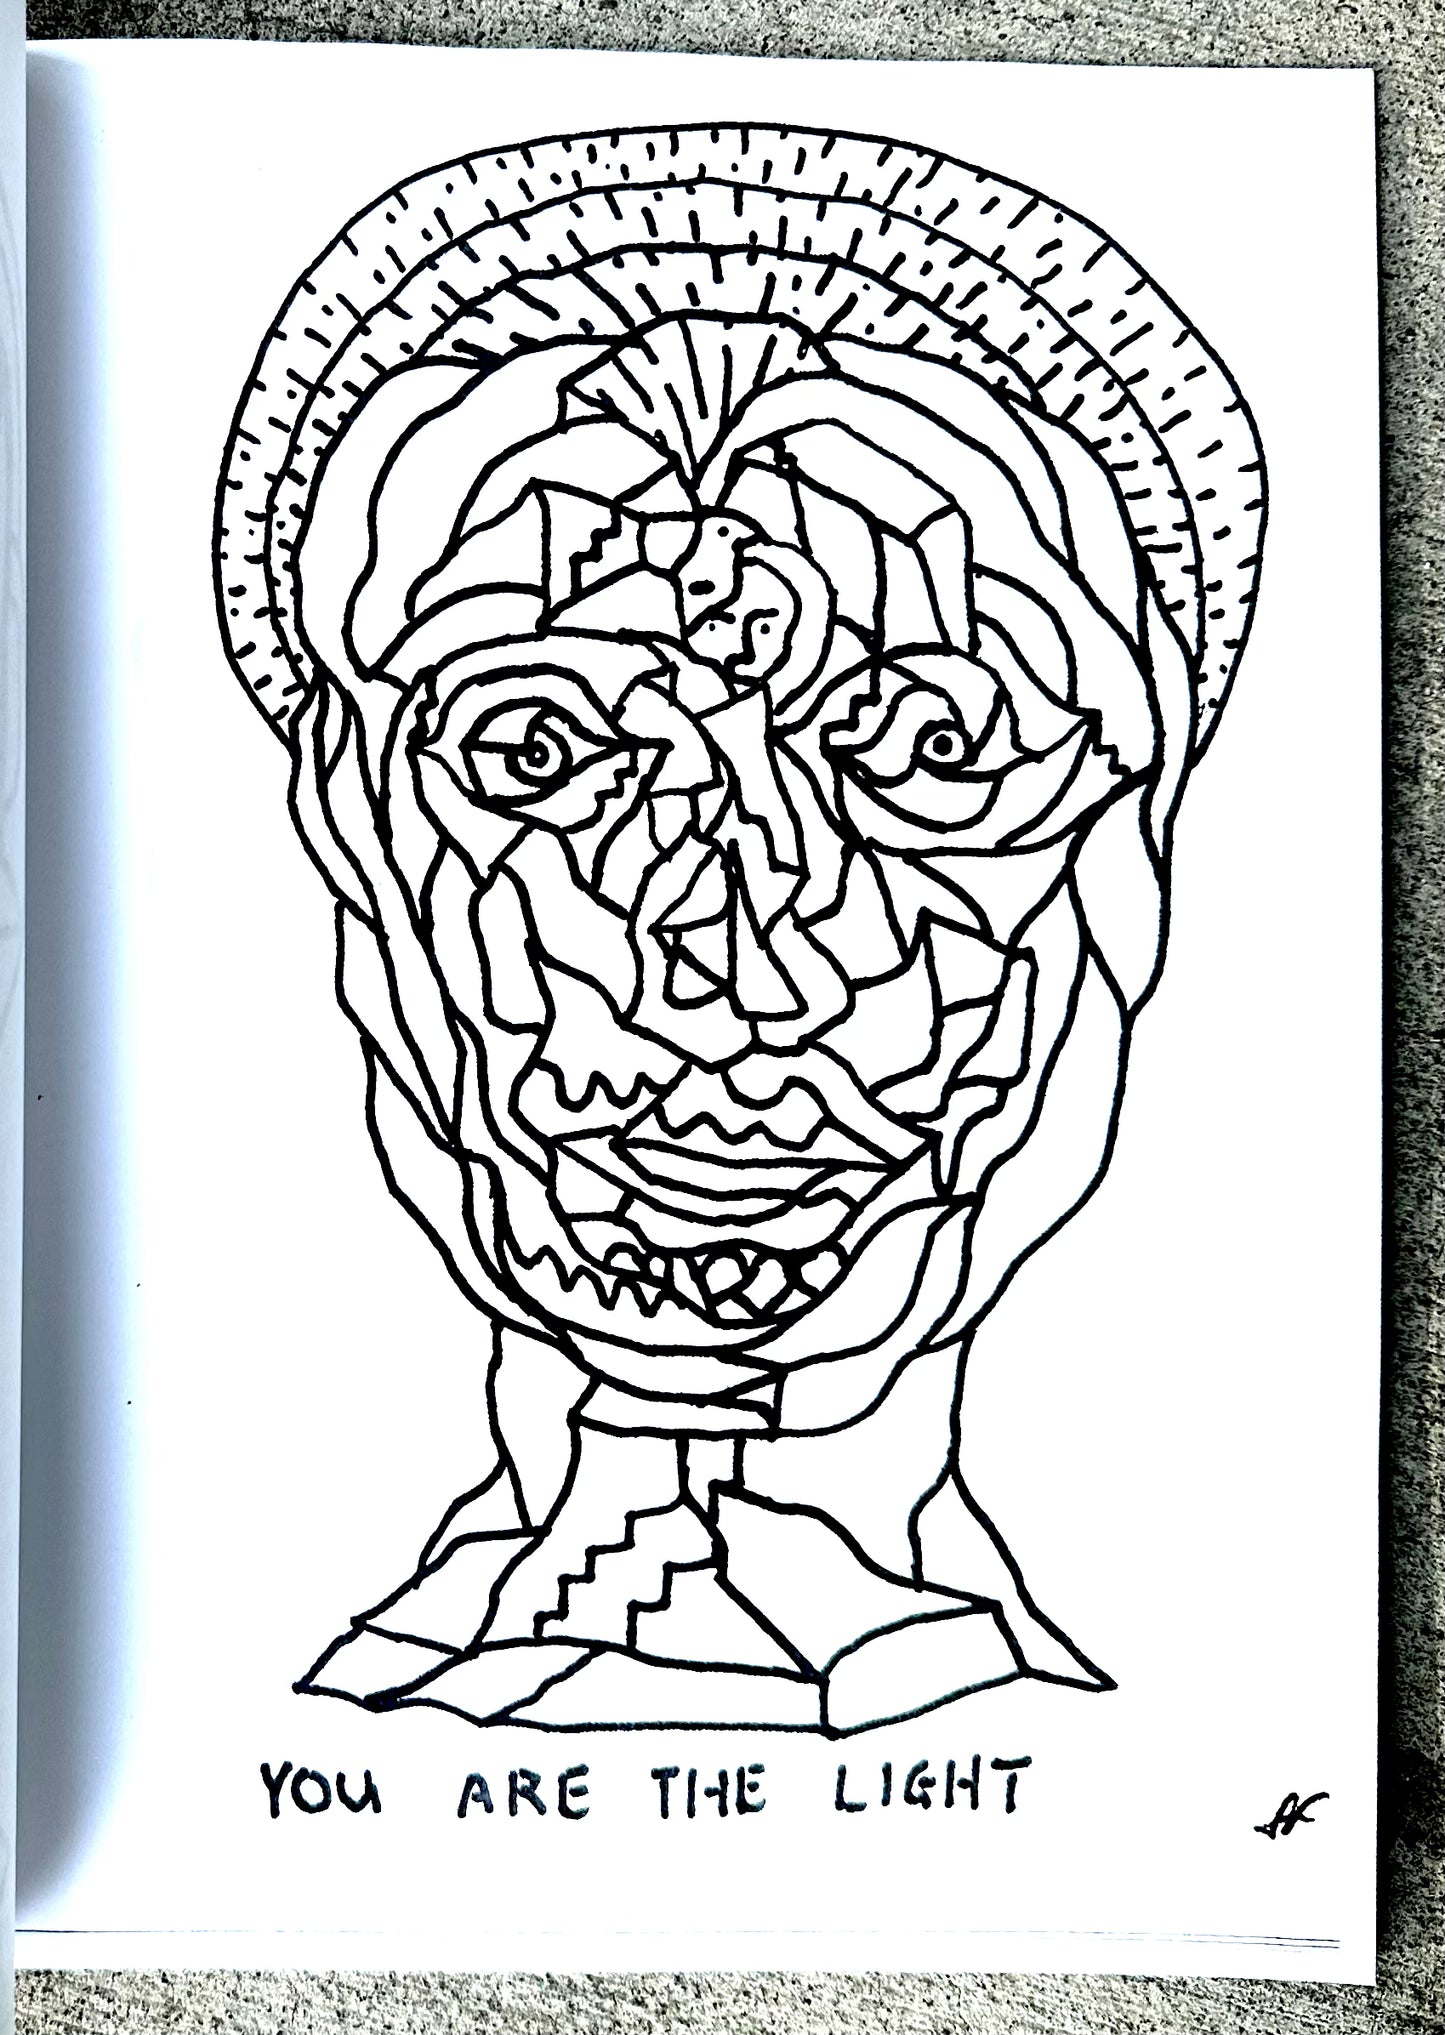 'COLOR LIFE' COLORING BOOK